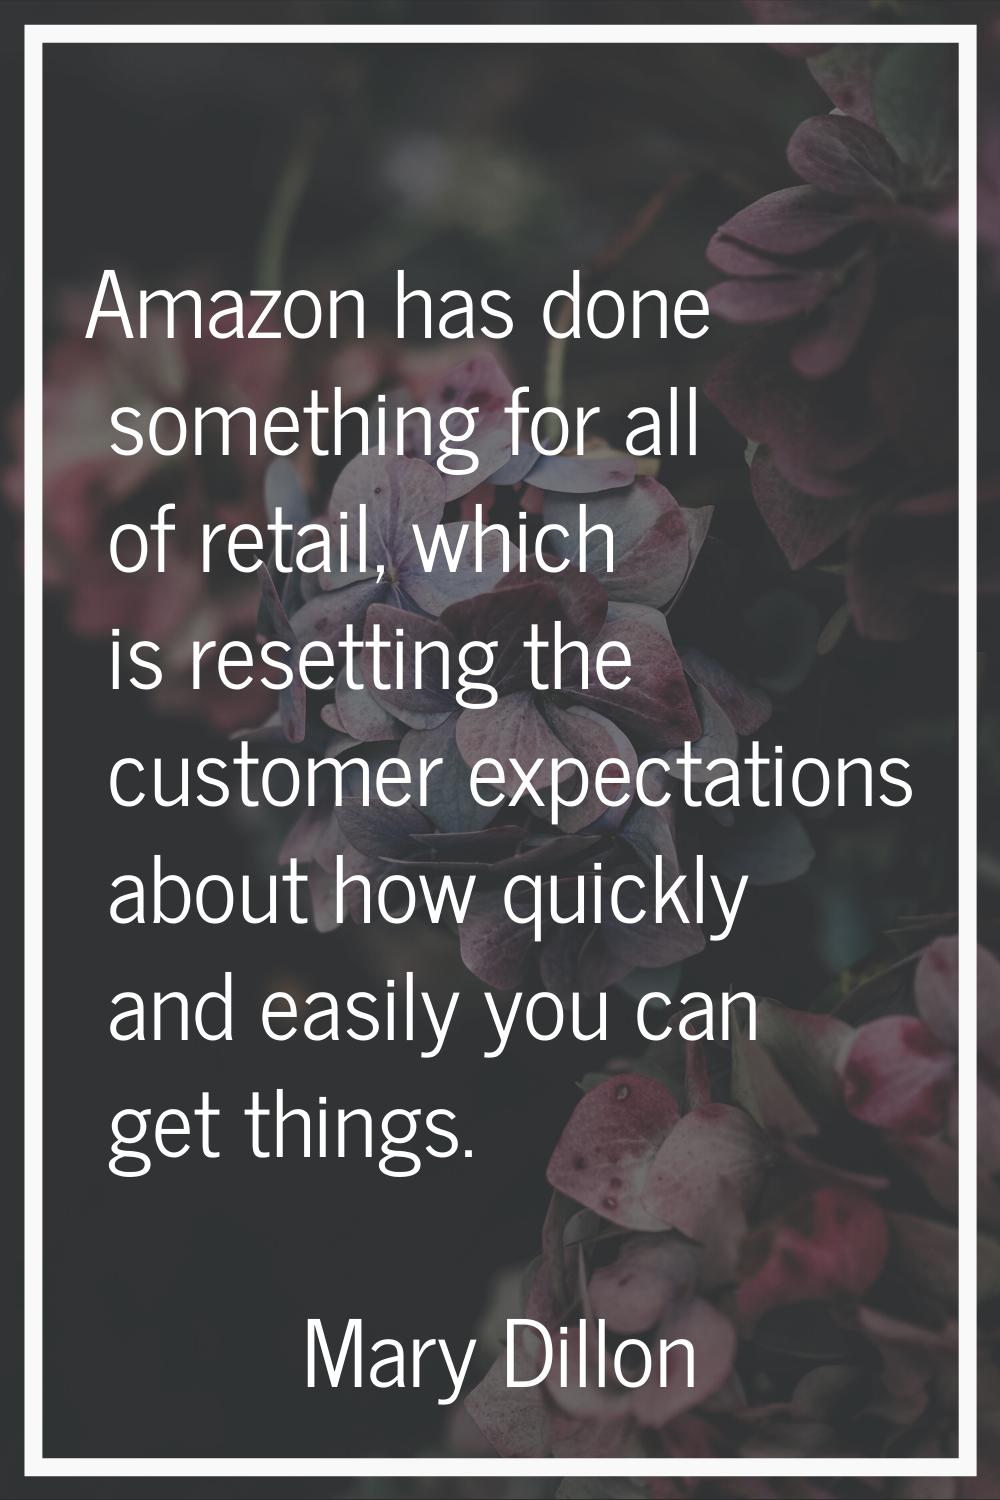 Amazon has done something for all of retail, which is resetting the customer expectations about how